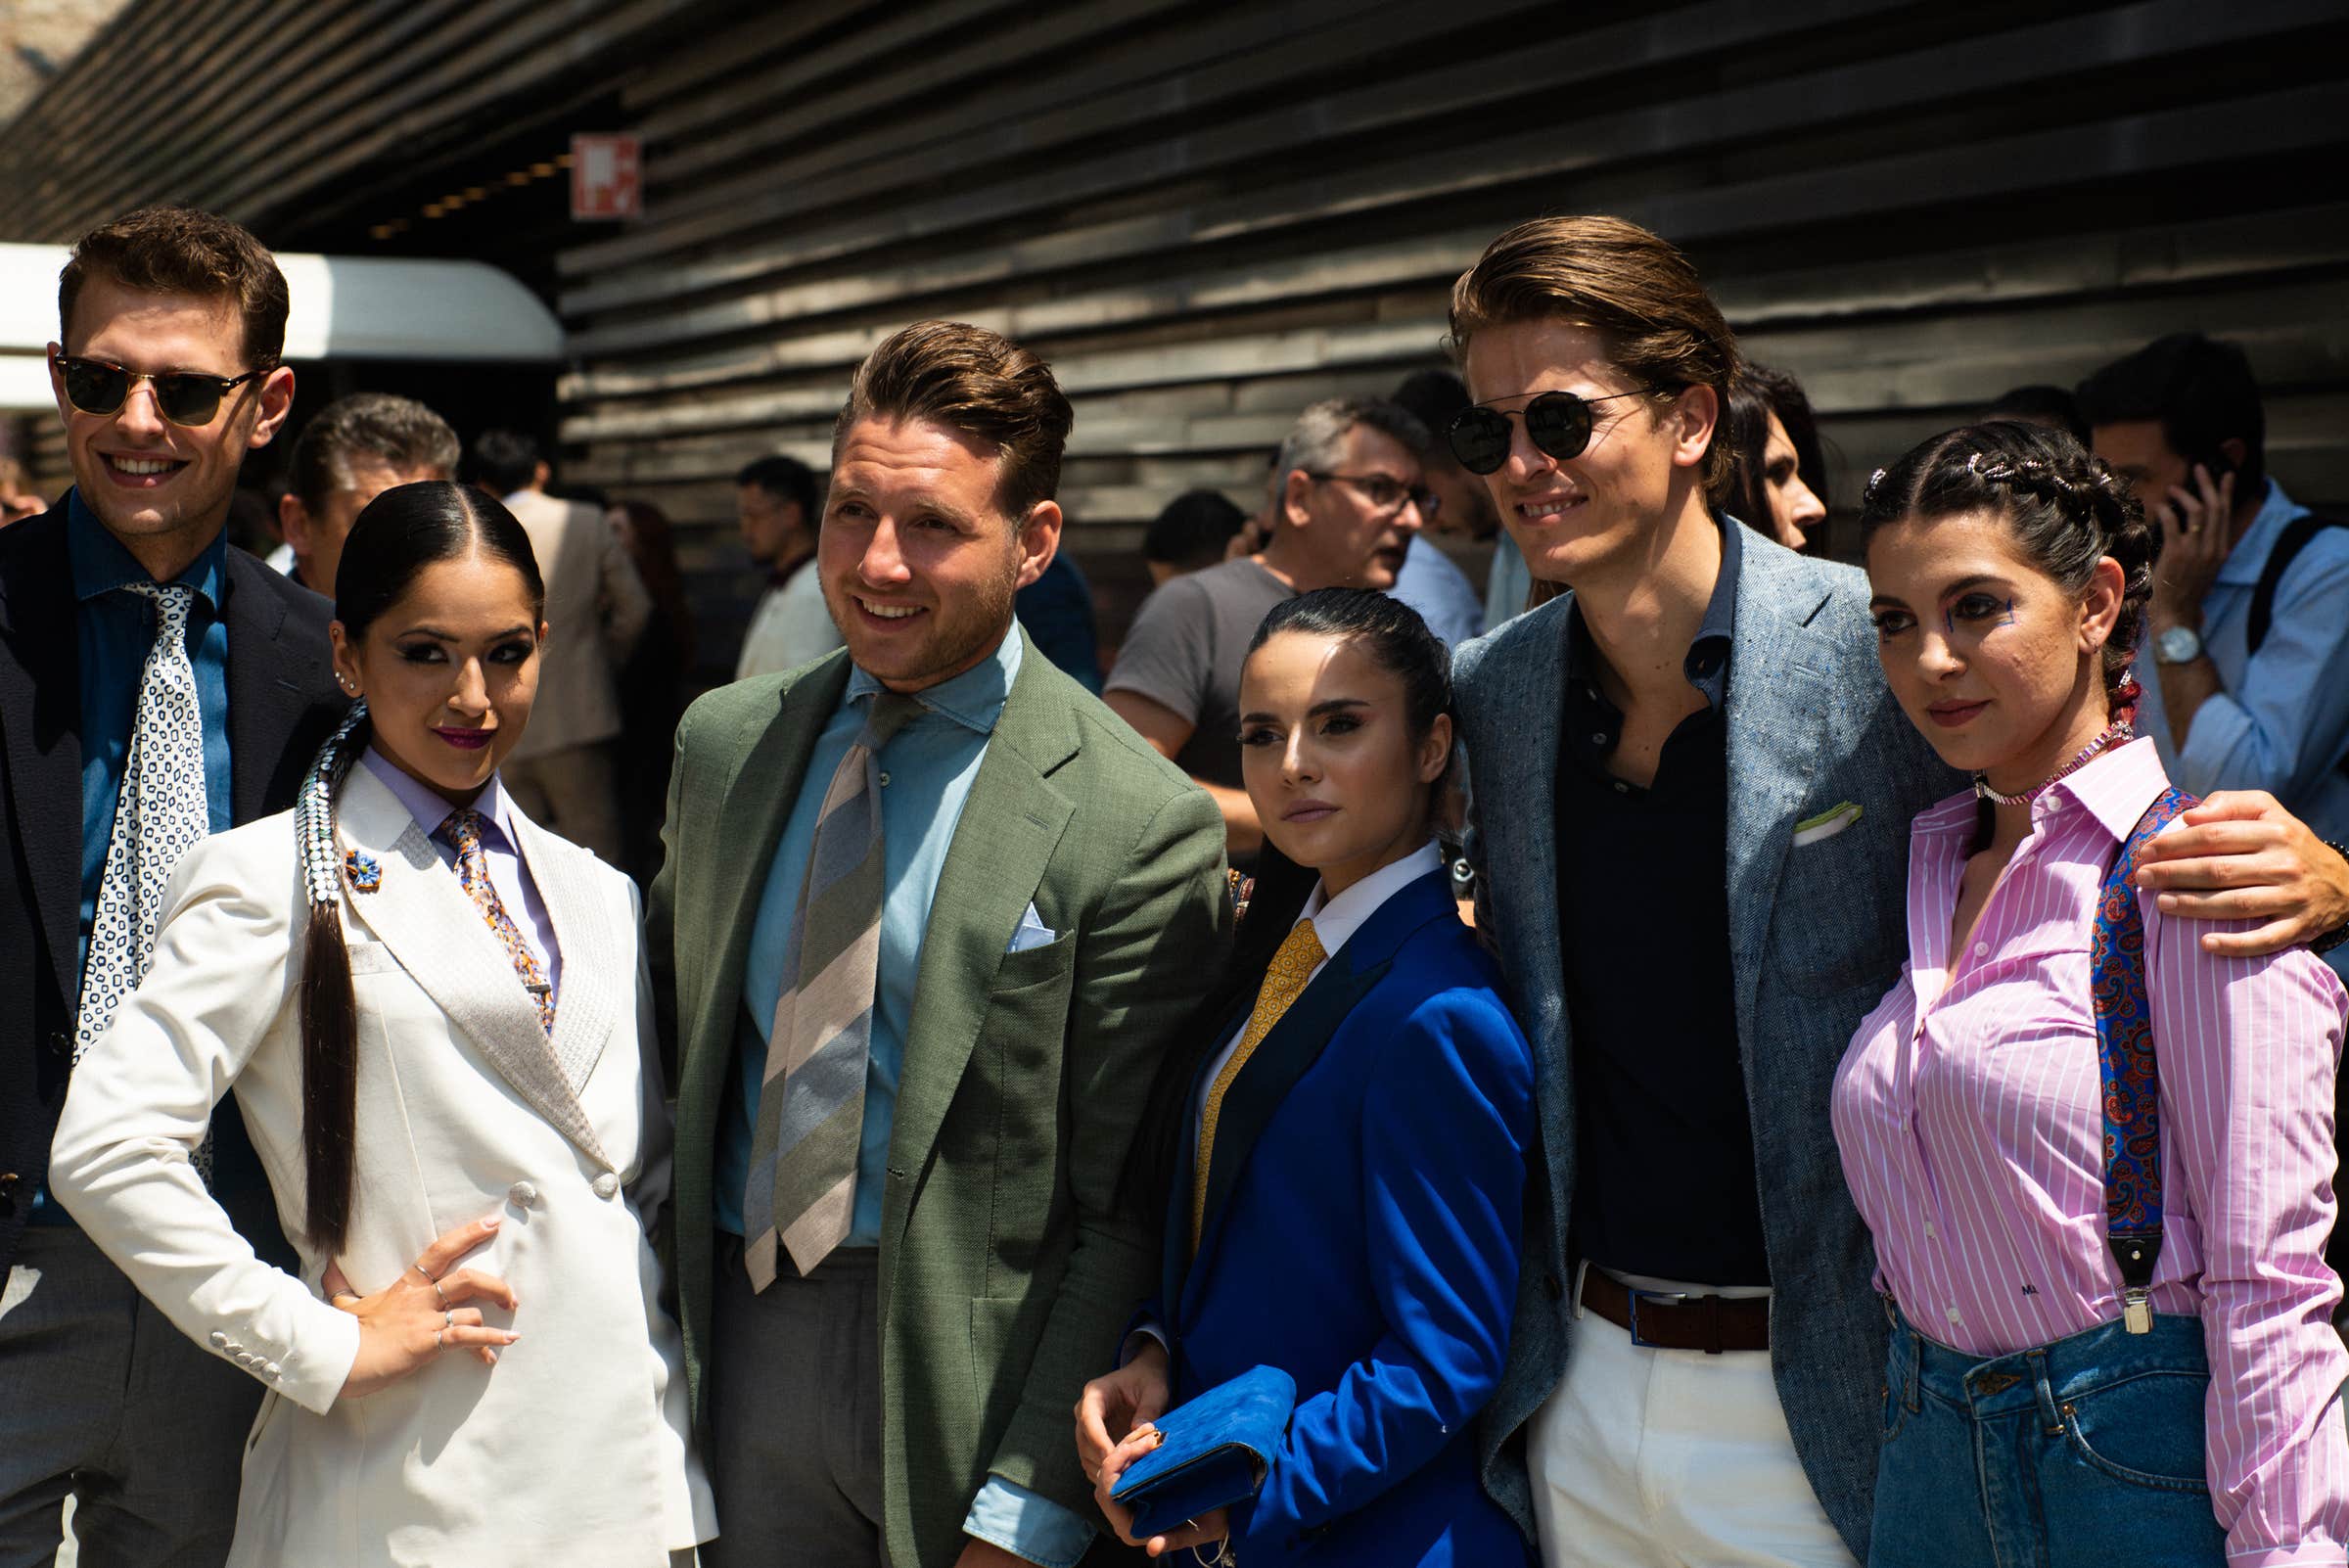 Pitti Uomo 96 - Trends for the upcoming seasons